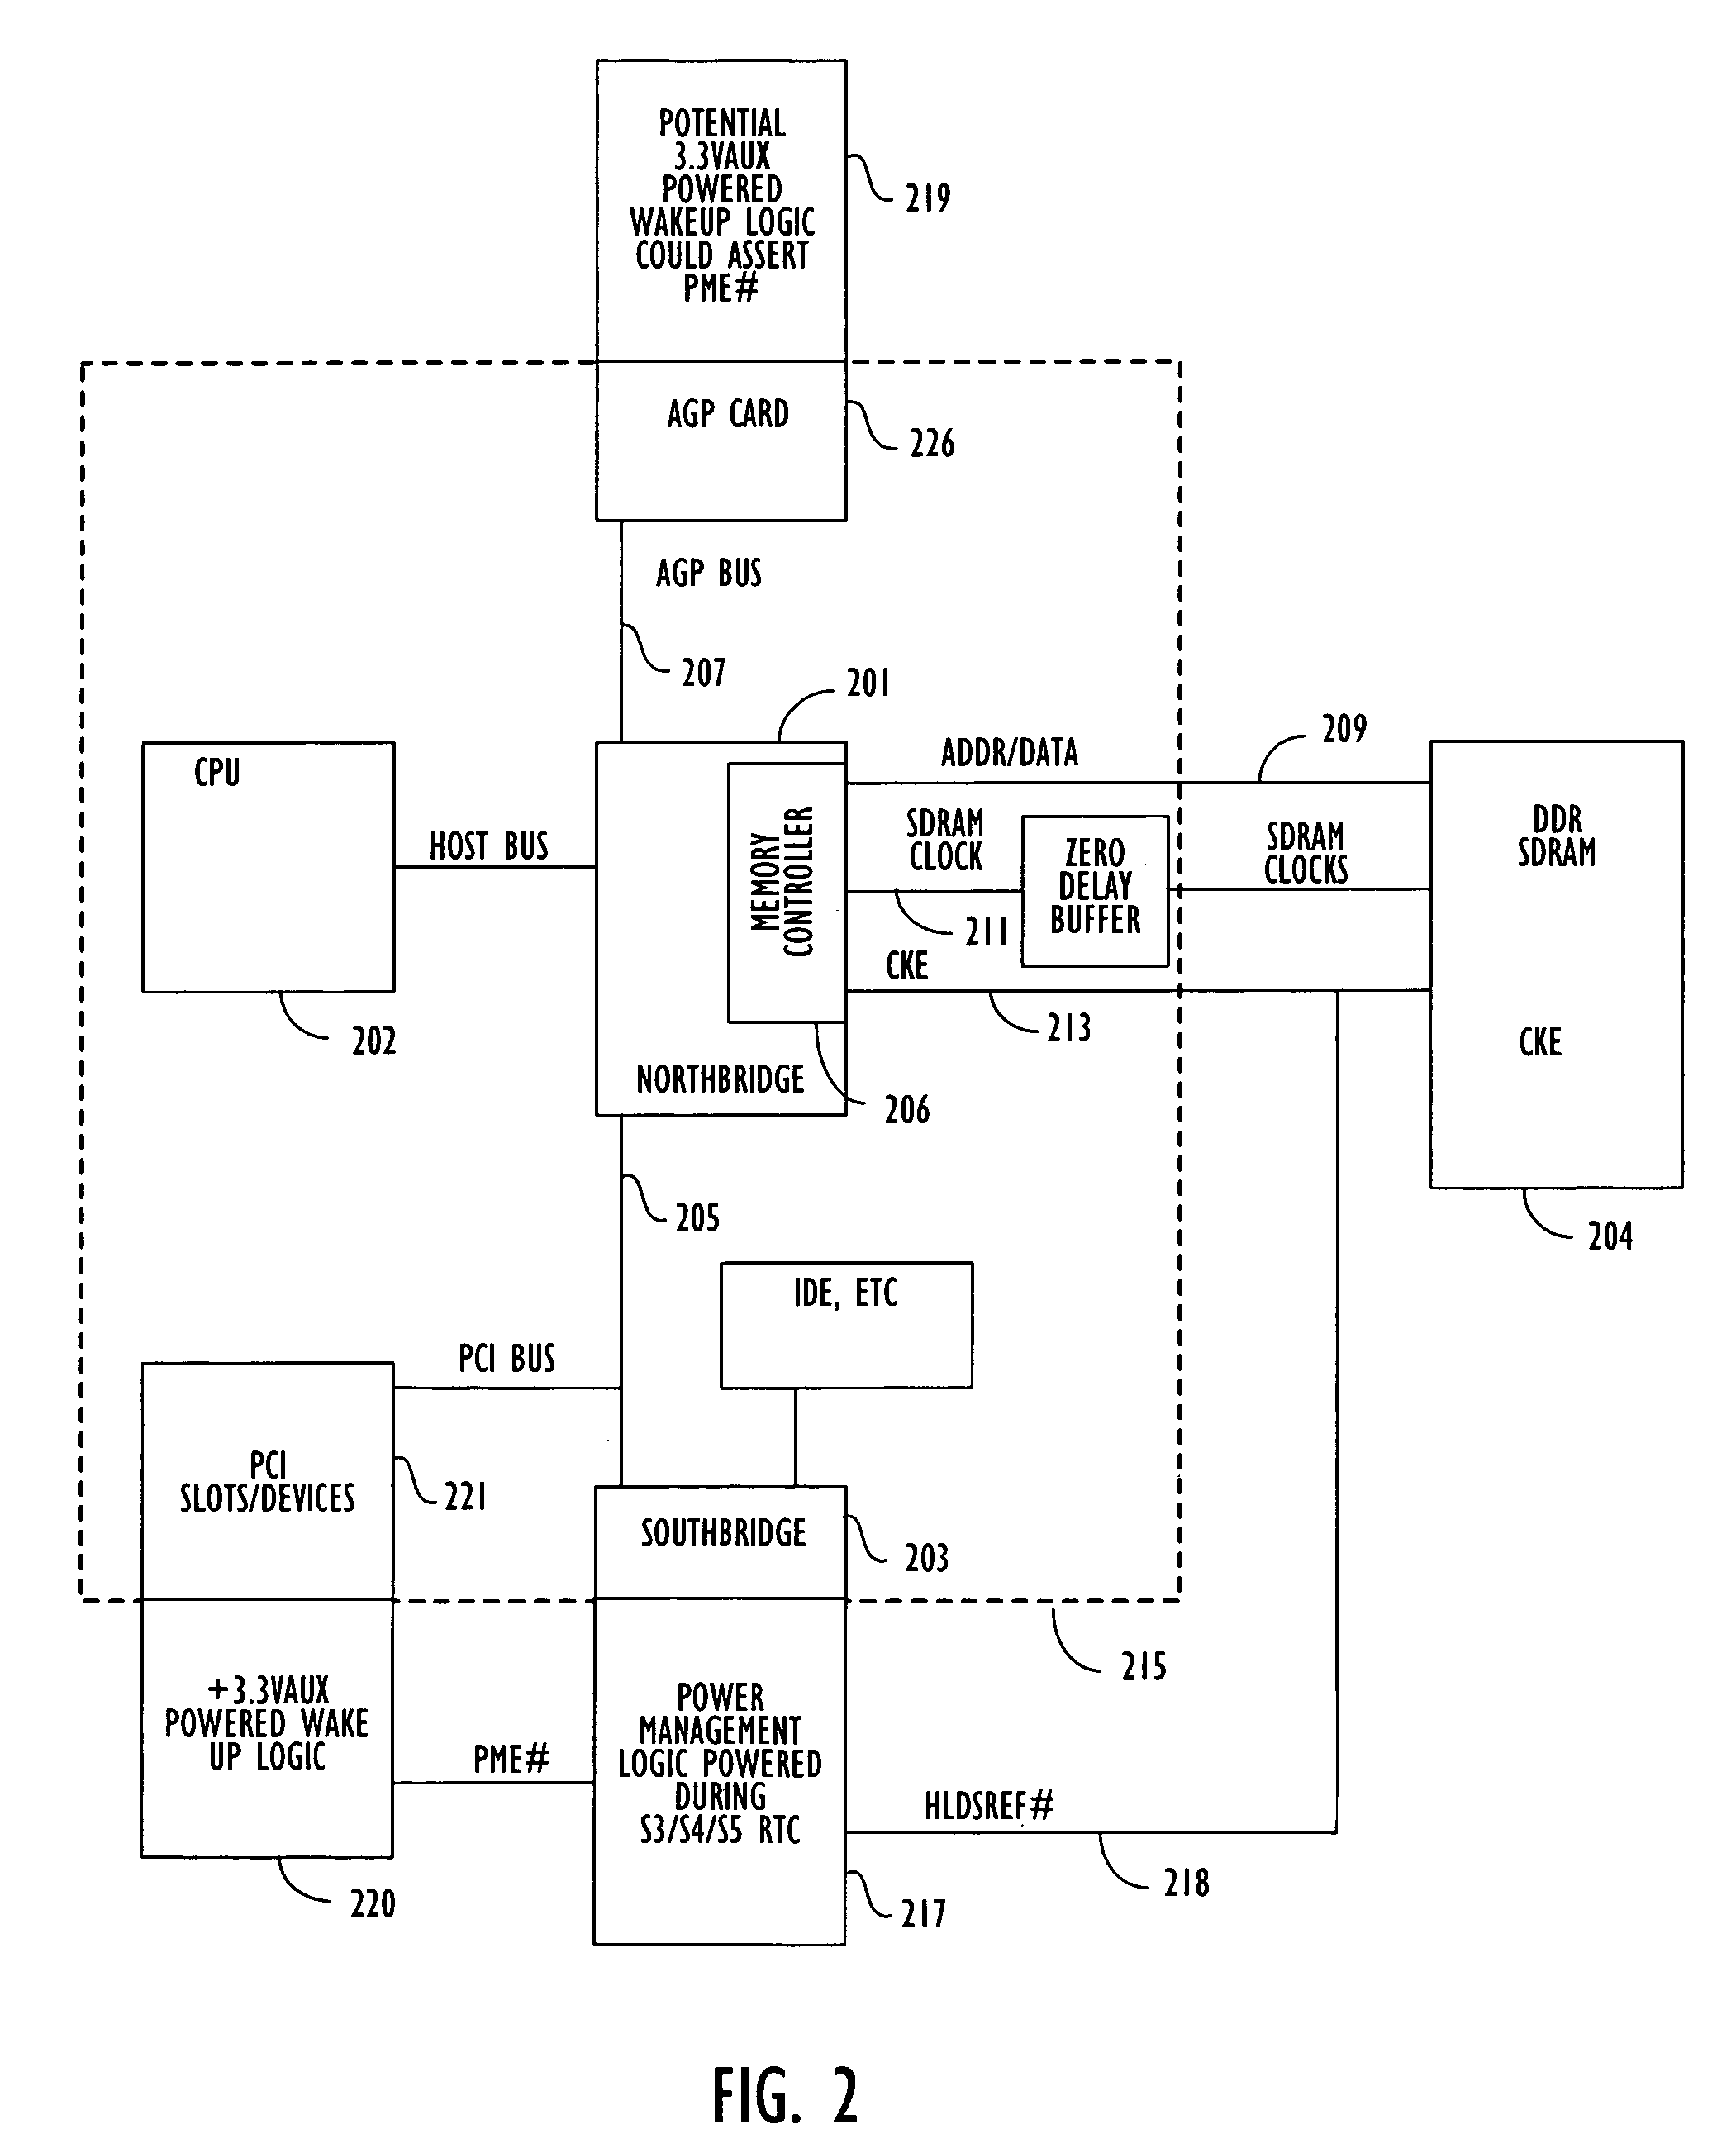 Method and apparatus for powering down the CPU/memory controller complex while preserving the self refresh state of memory in the system